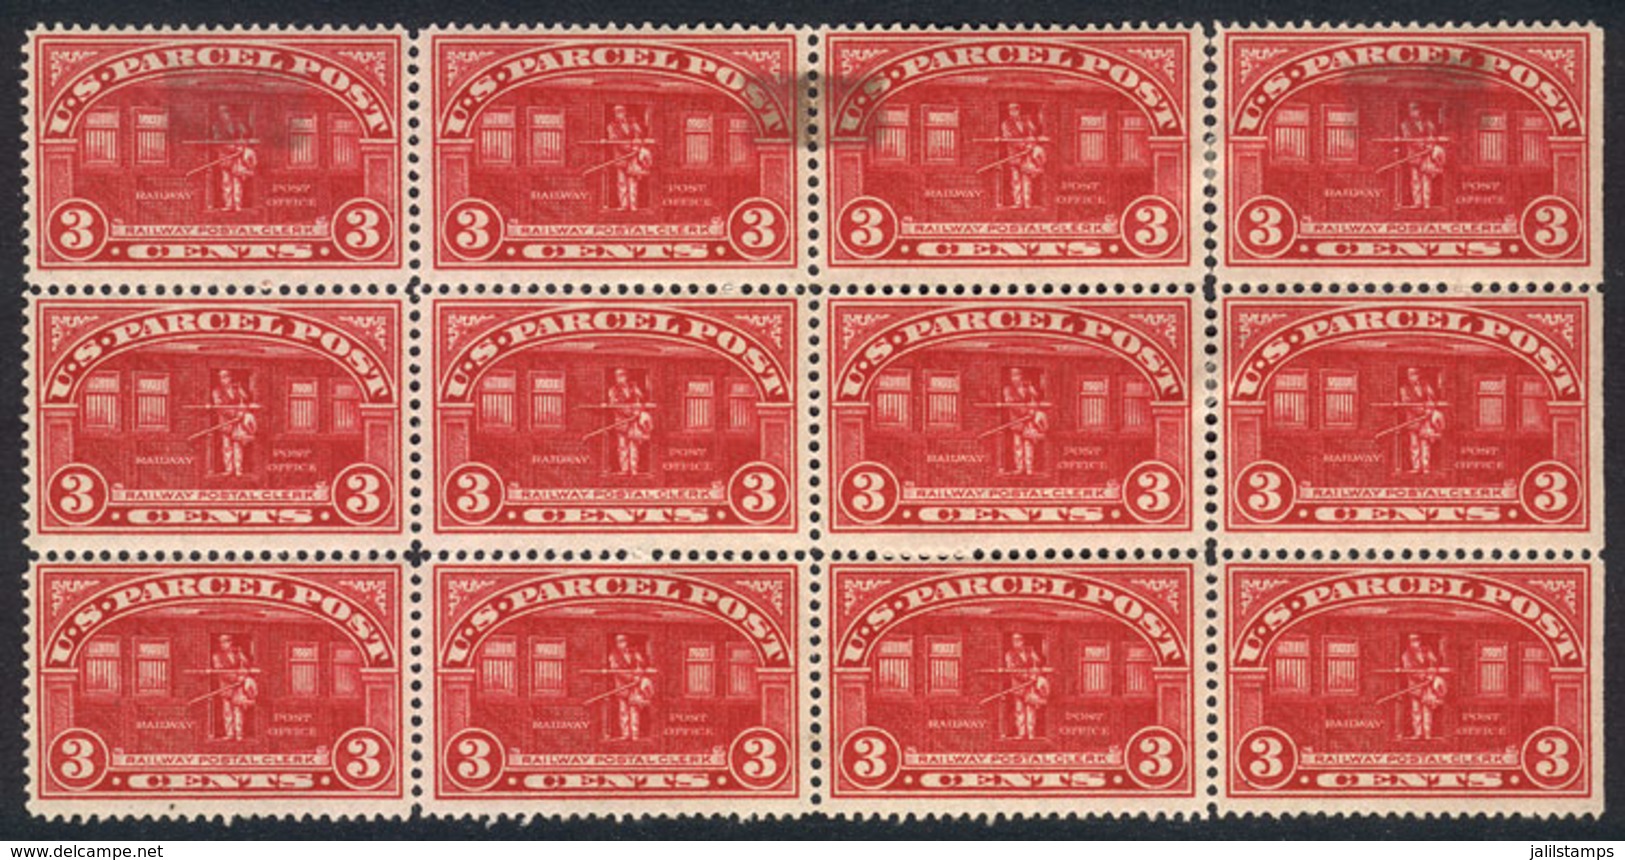 UNITED STATES: Sc.Q3, 1913 3c. Railway Postal Clerk, Beautiful BLOCK OF 12, The 4 Top Stamps With Hinge Mark Stains, The - Paketmarken